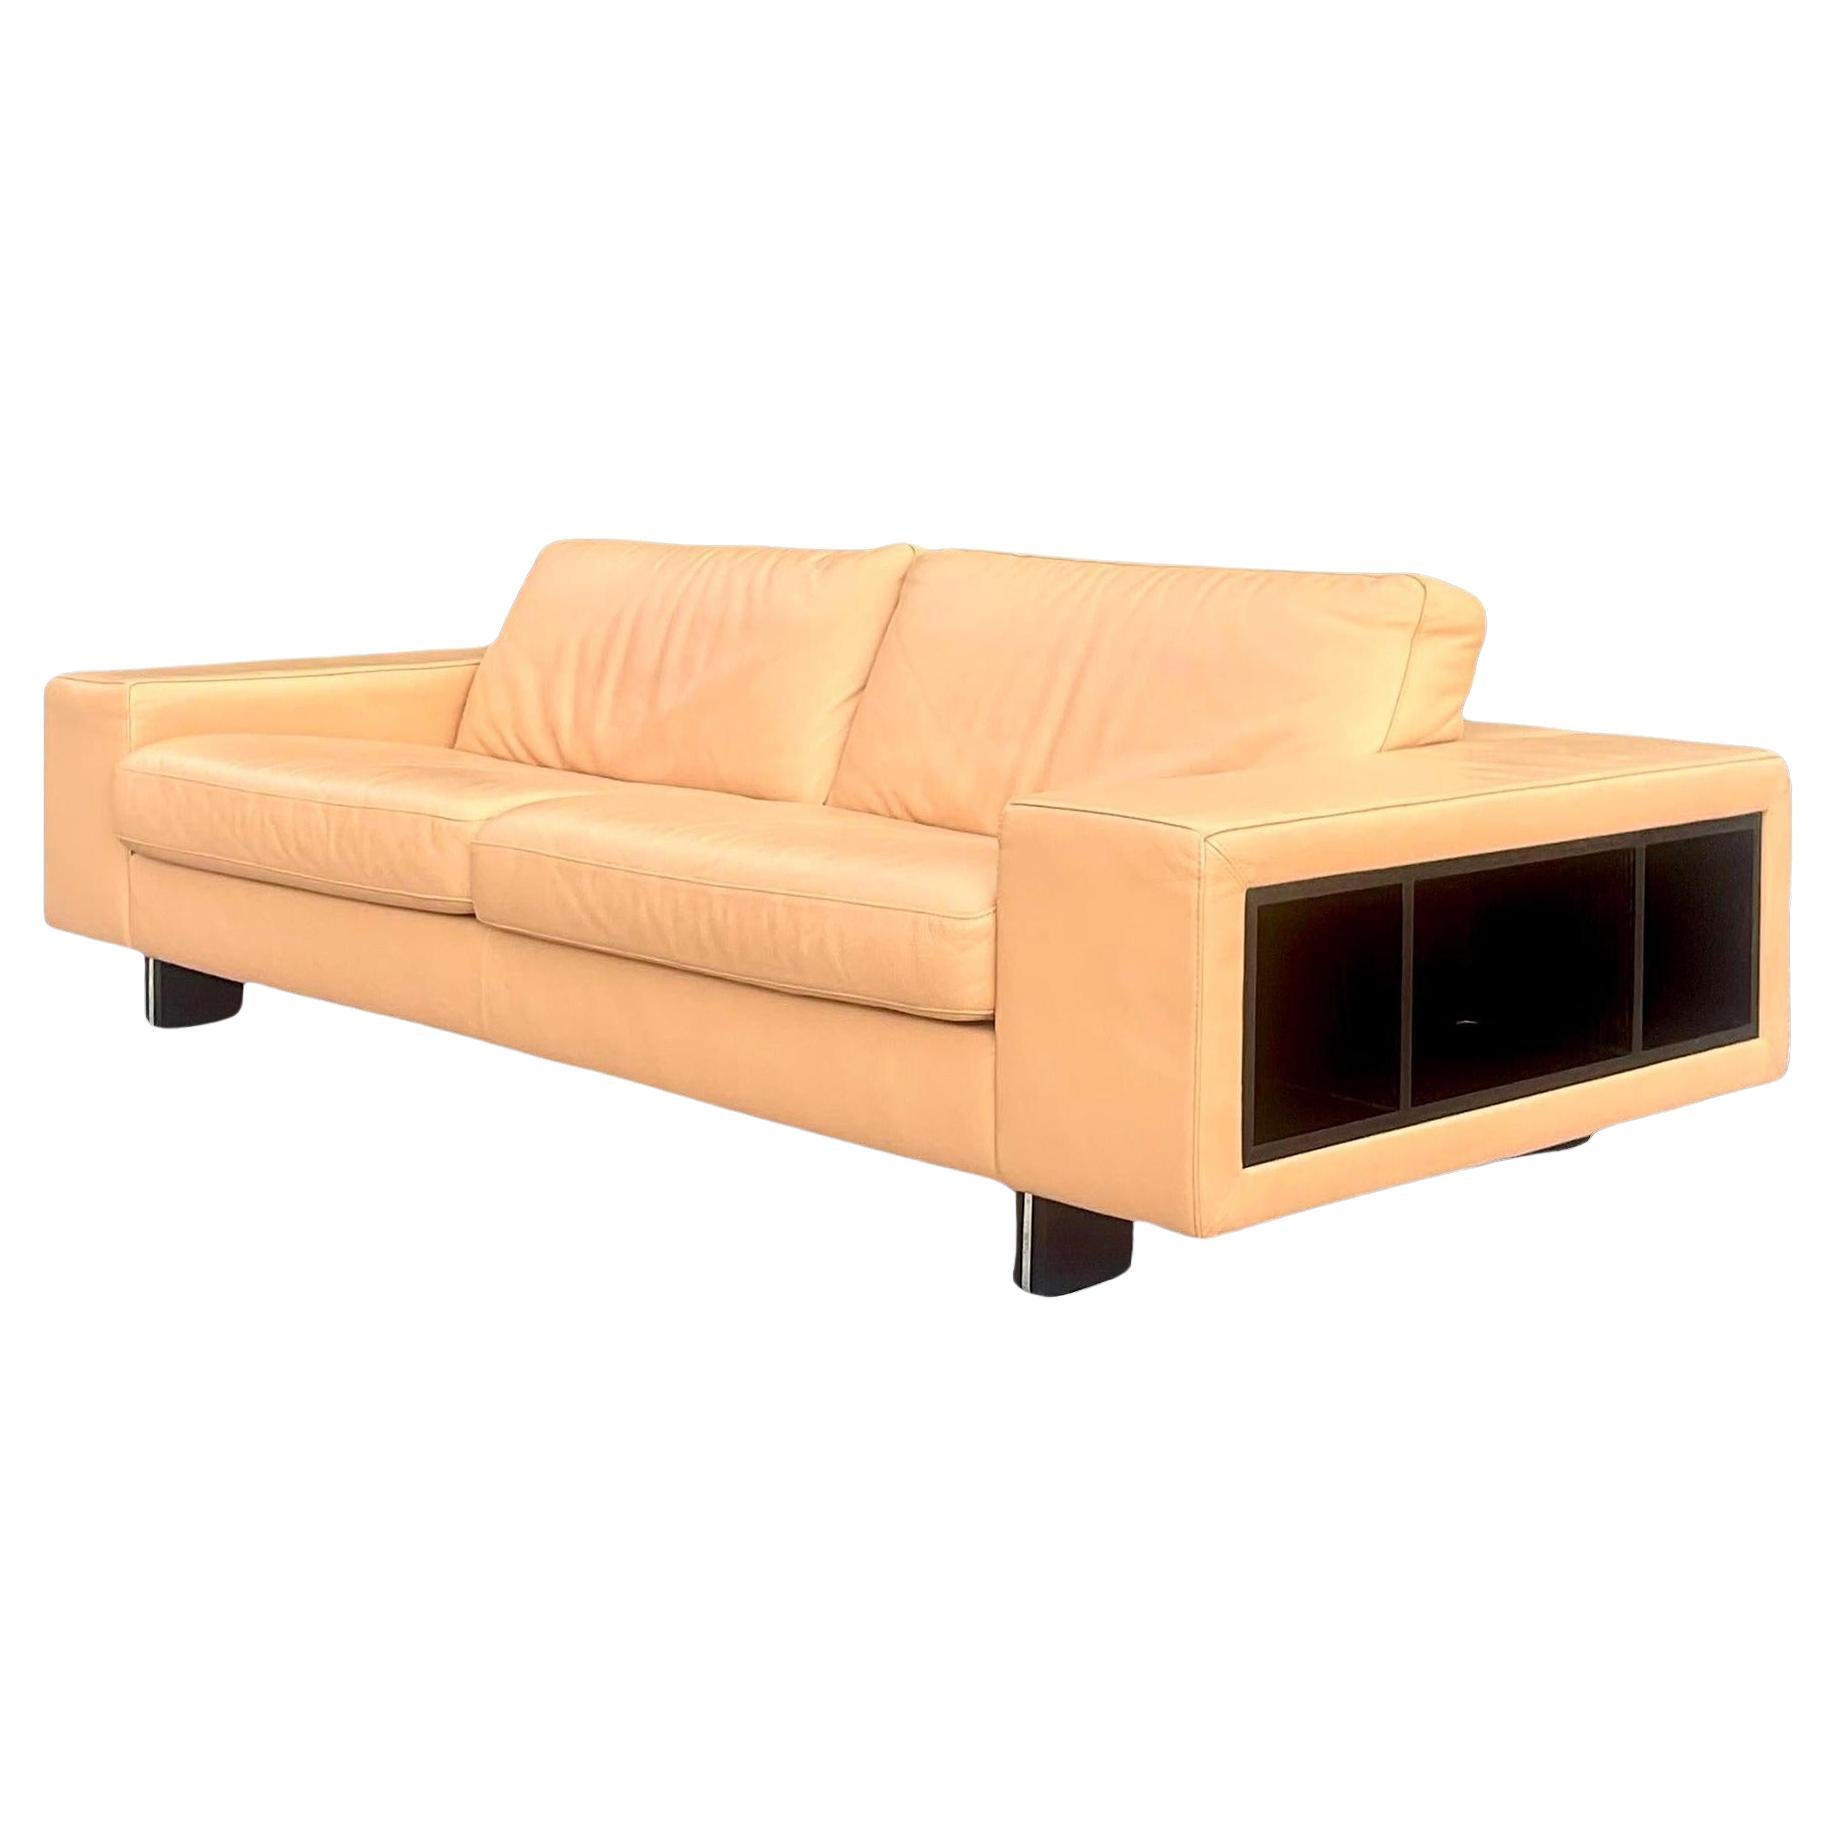 Vintage Contemporary Tagged Roche Bobois Leather Shelf Sofa For Sale